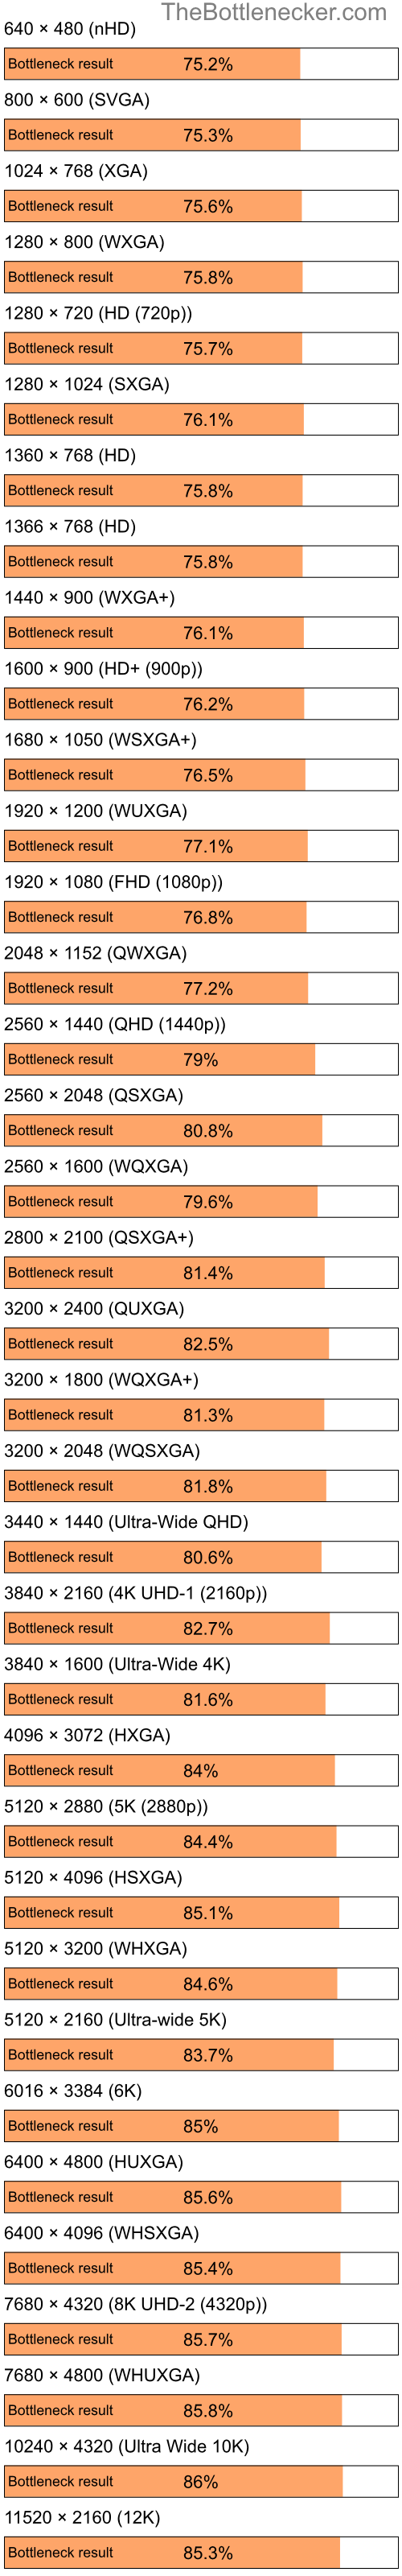 Bottleneck results by resolution for Intel Pentium 4 and NVIDIA GeForce 7100 GS in Graphic Card Intense Tasks